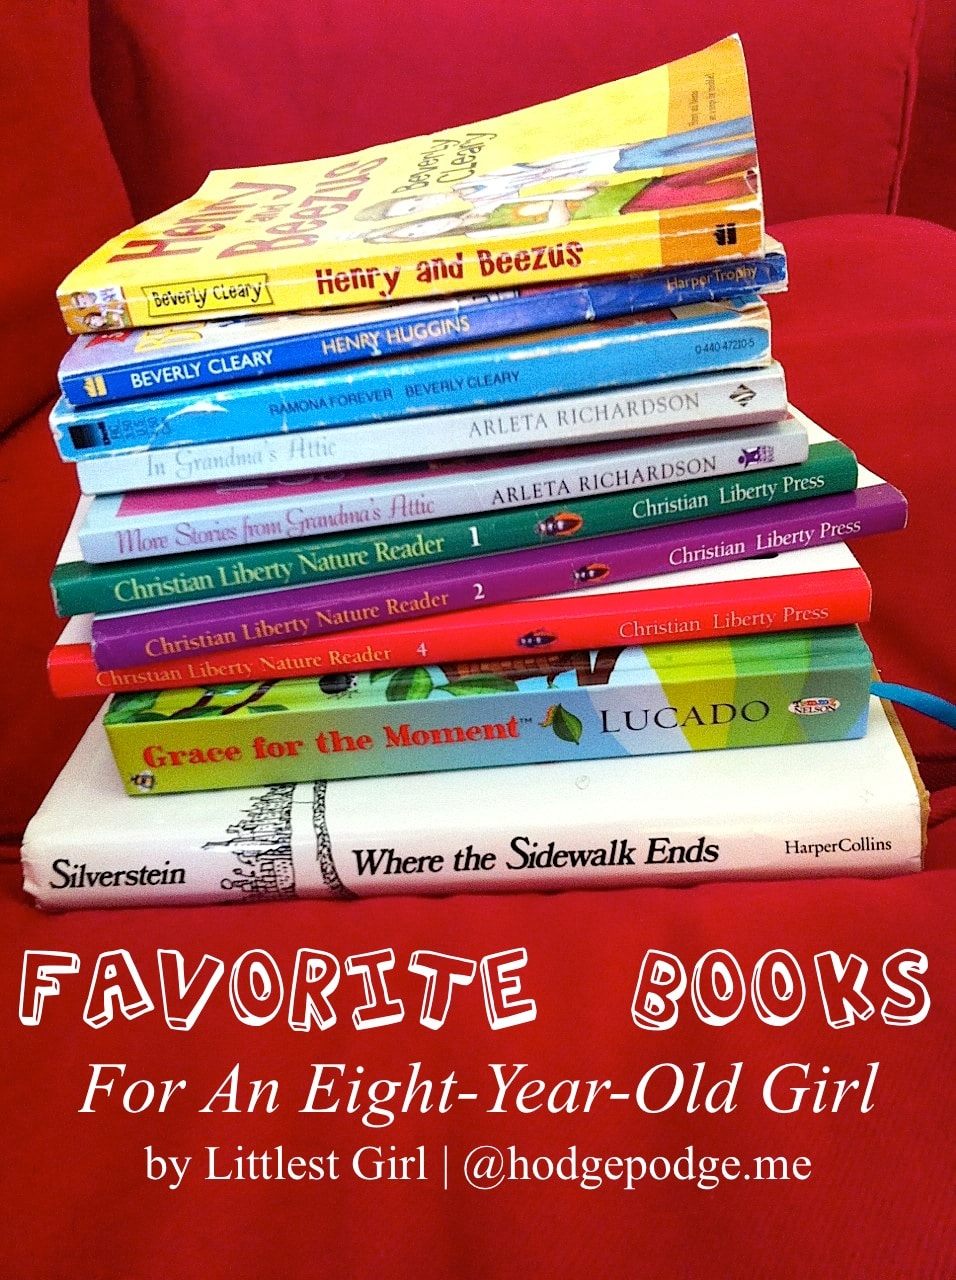 Favorite Books for an Eight-Year-Old Girl